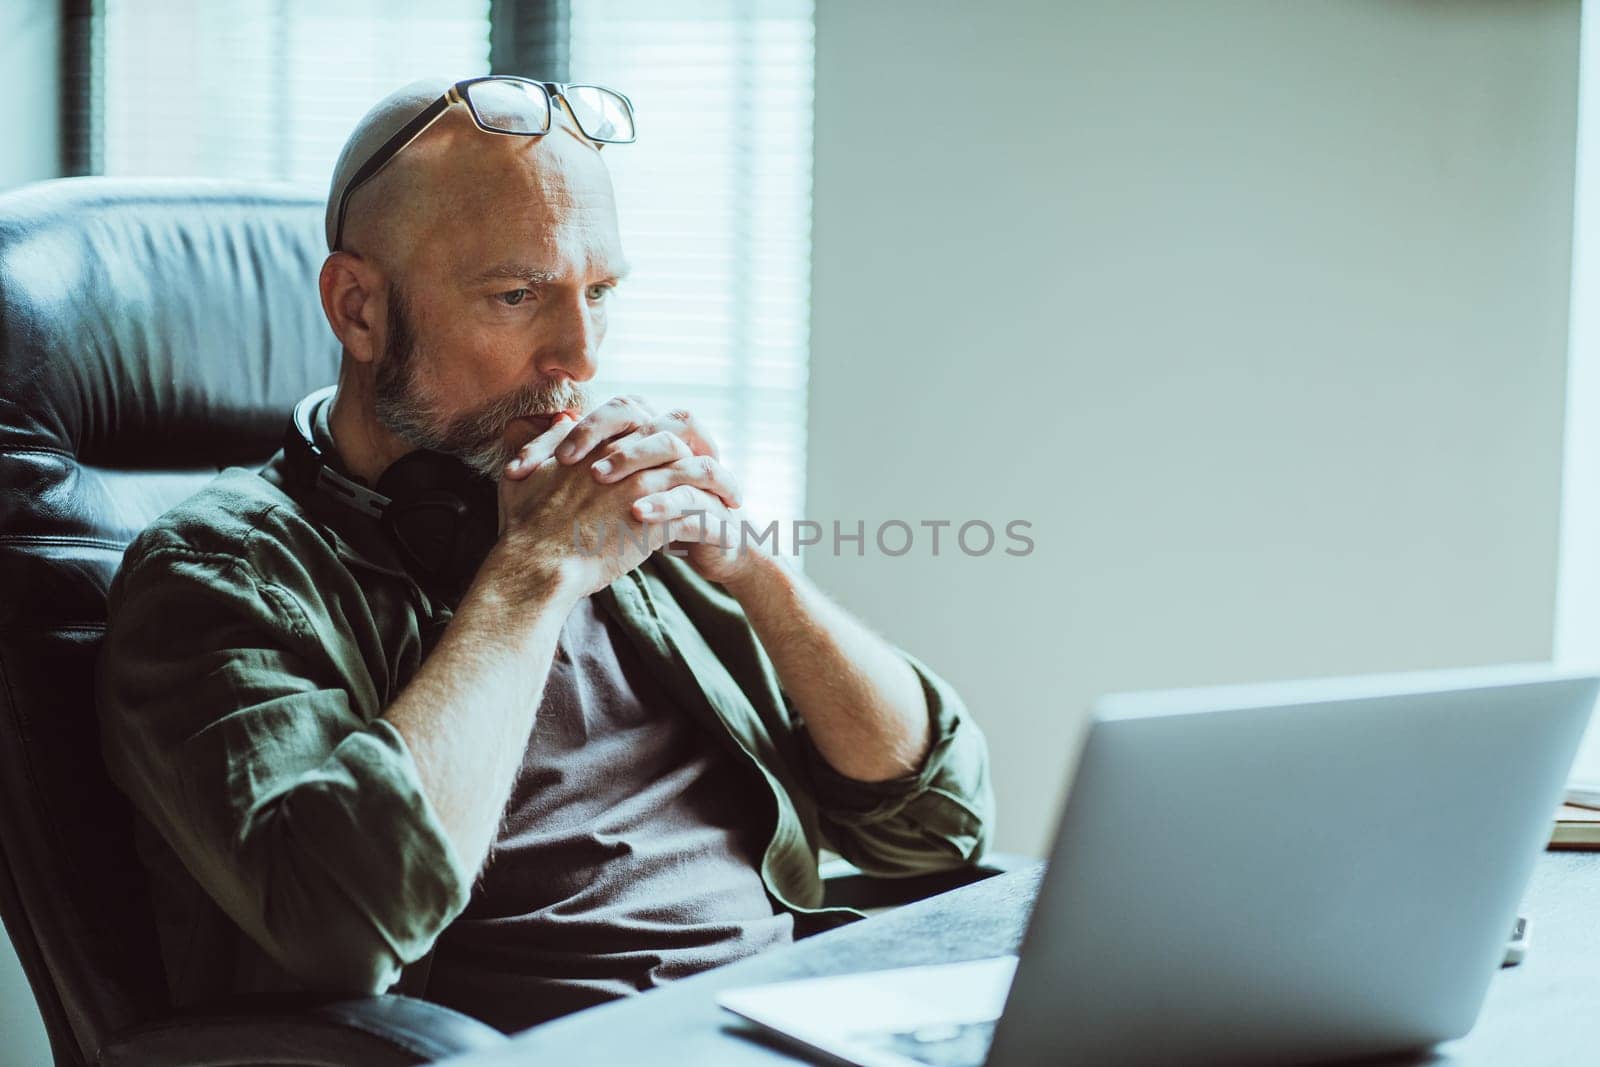 Middle-aged man fully focused on work he looks intently at computer on table. Deep in thought, he reflects on task or problem at hand, demonstrating his analytical and strategic thinking skills. by LipikStockMedia